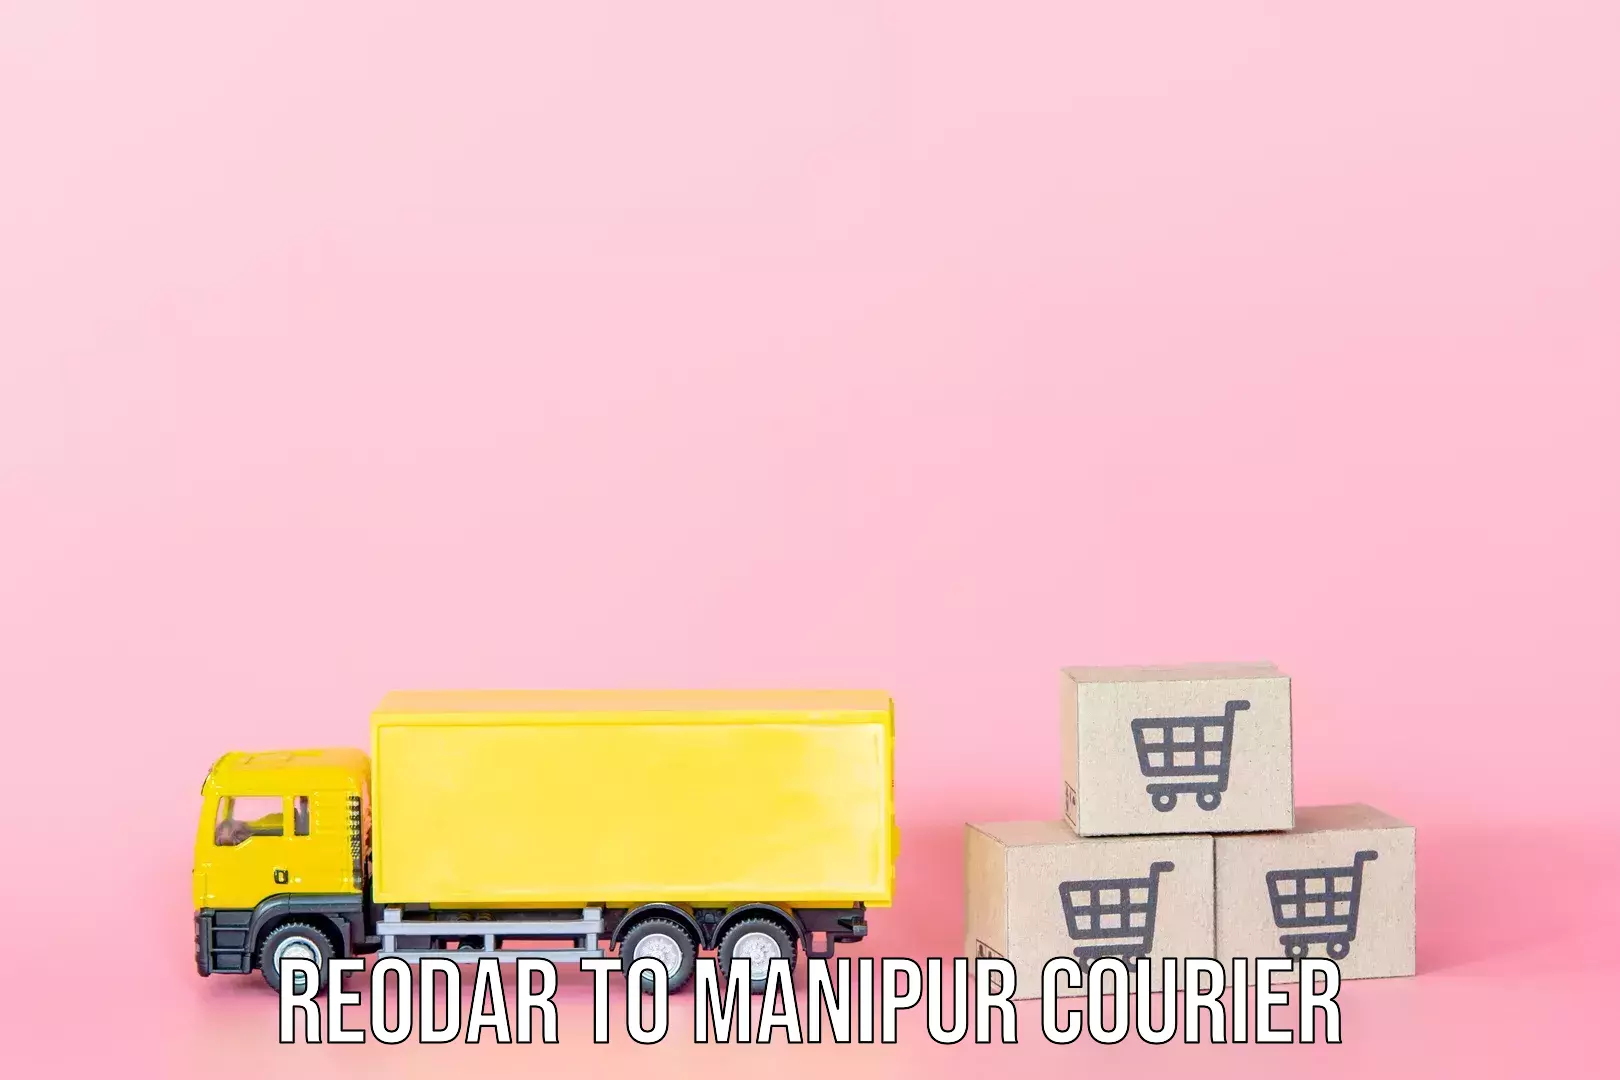 Luggage shipment specialists Reodar to Manipur